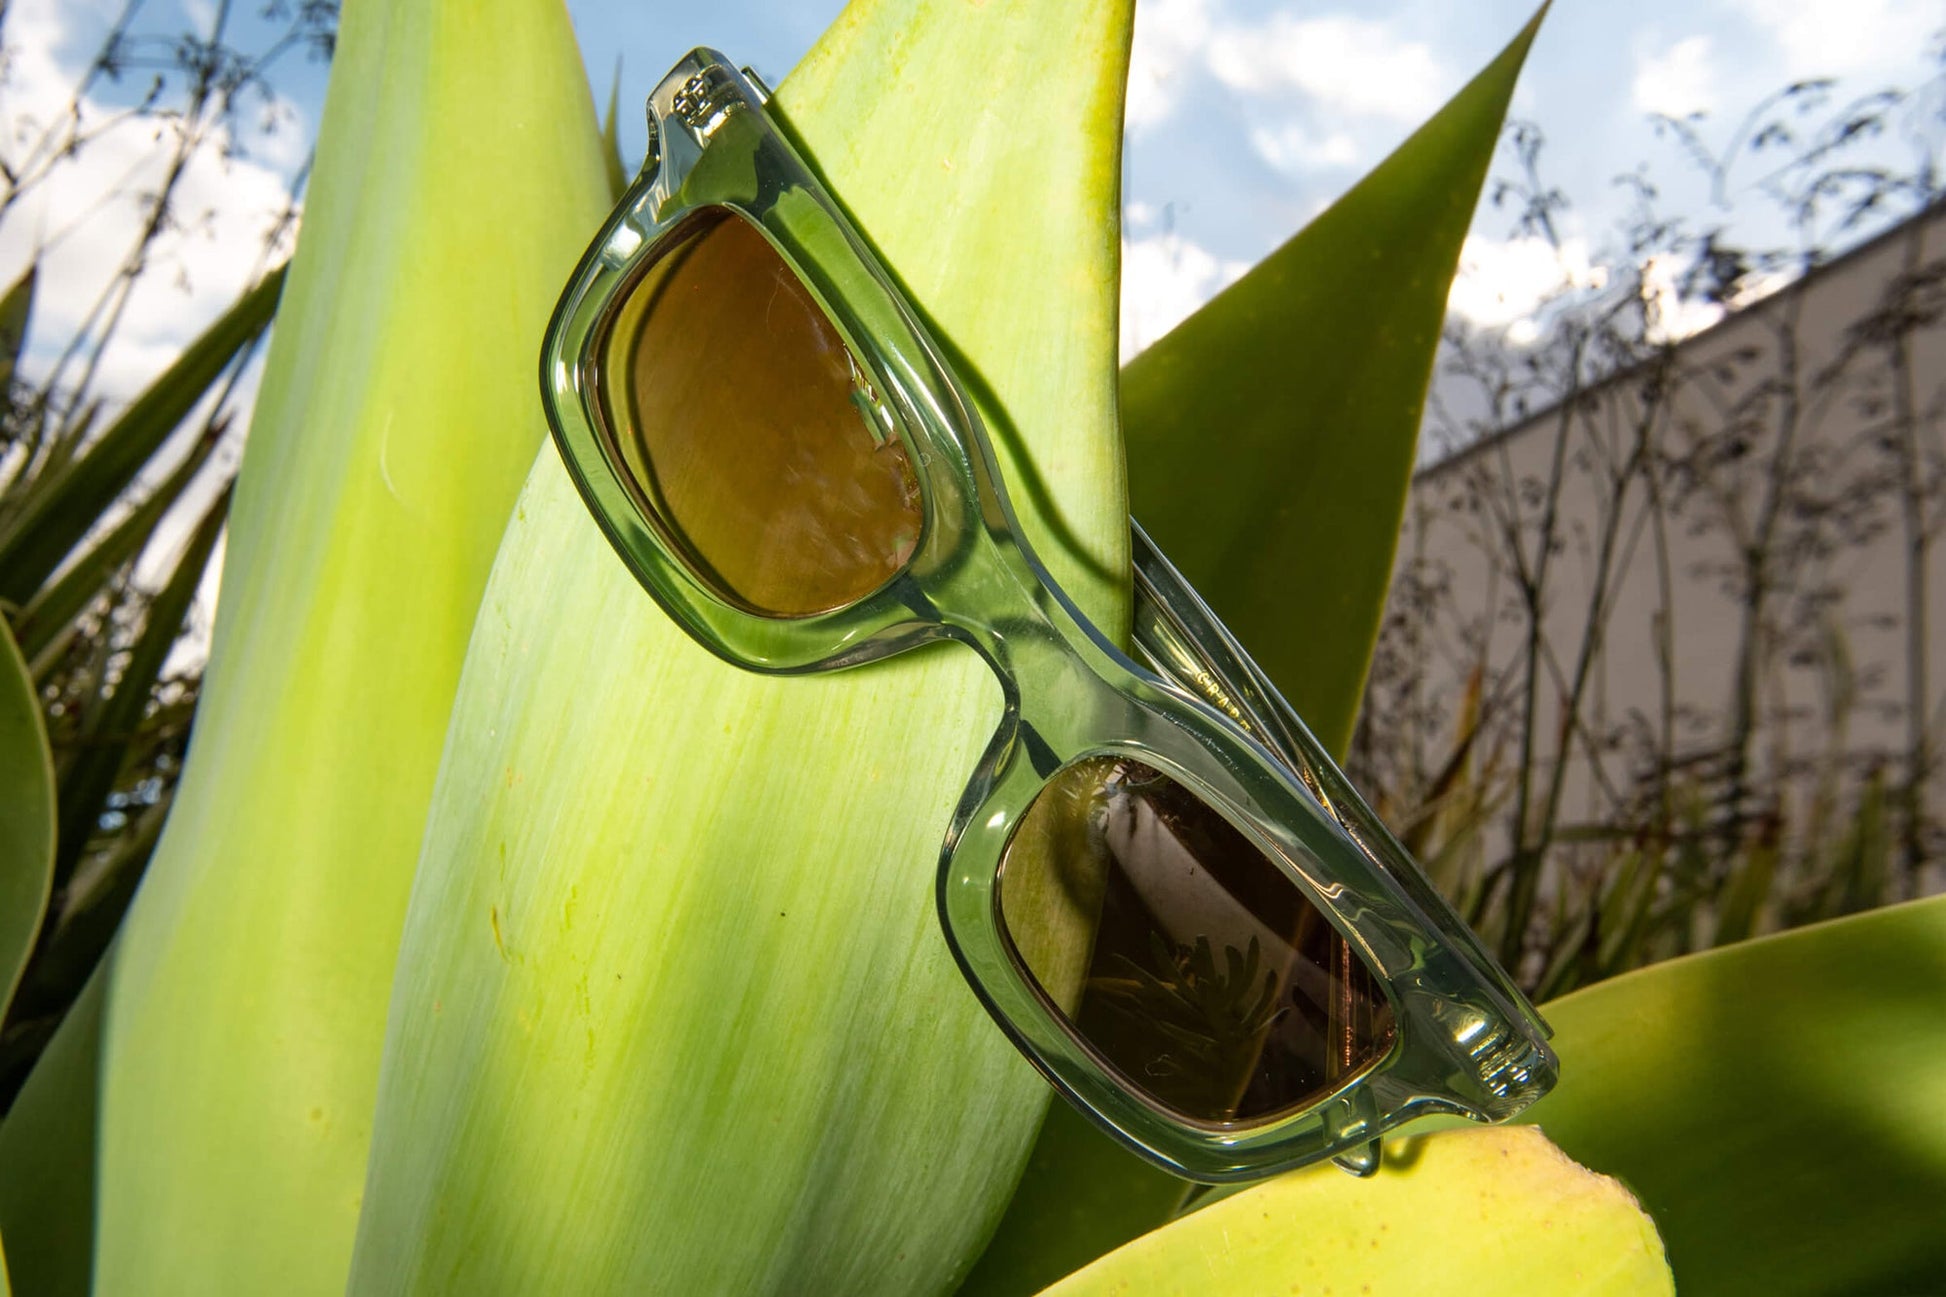 The Anti Matter is a bold, chunky frame that favors medium to large heads. Spring hinges allow for a more accommodating, comfortable fit. Handcrafted bioacetate frames—biodegradable, plant-based, earth-friendlier. Rx-ready.